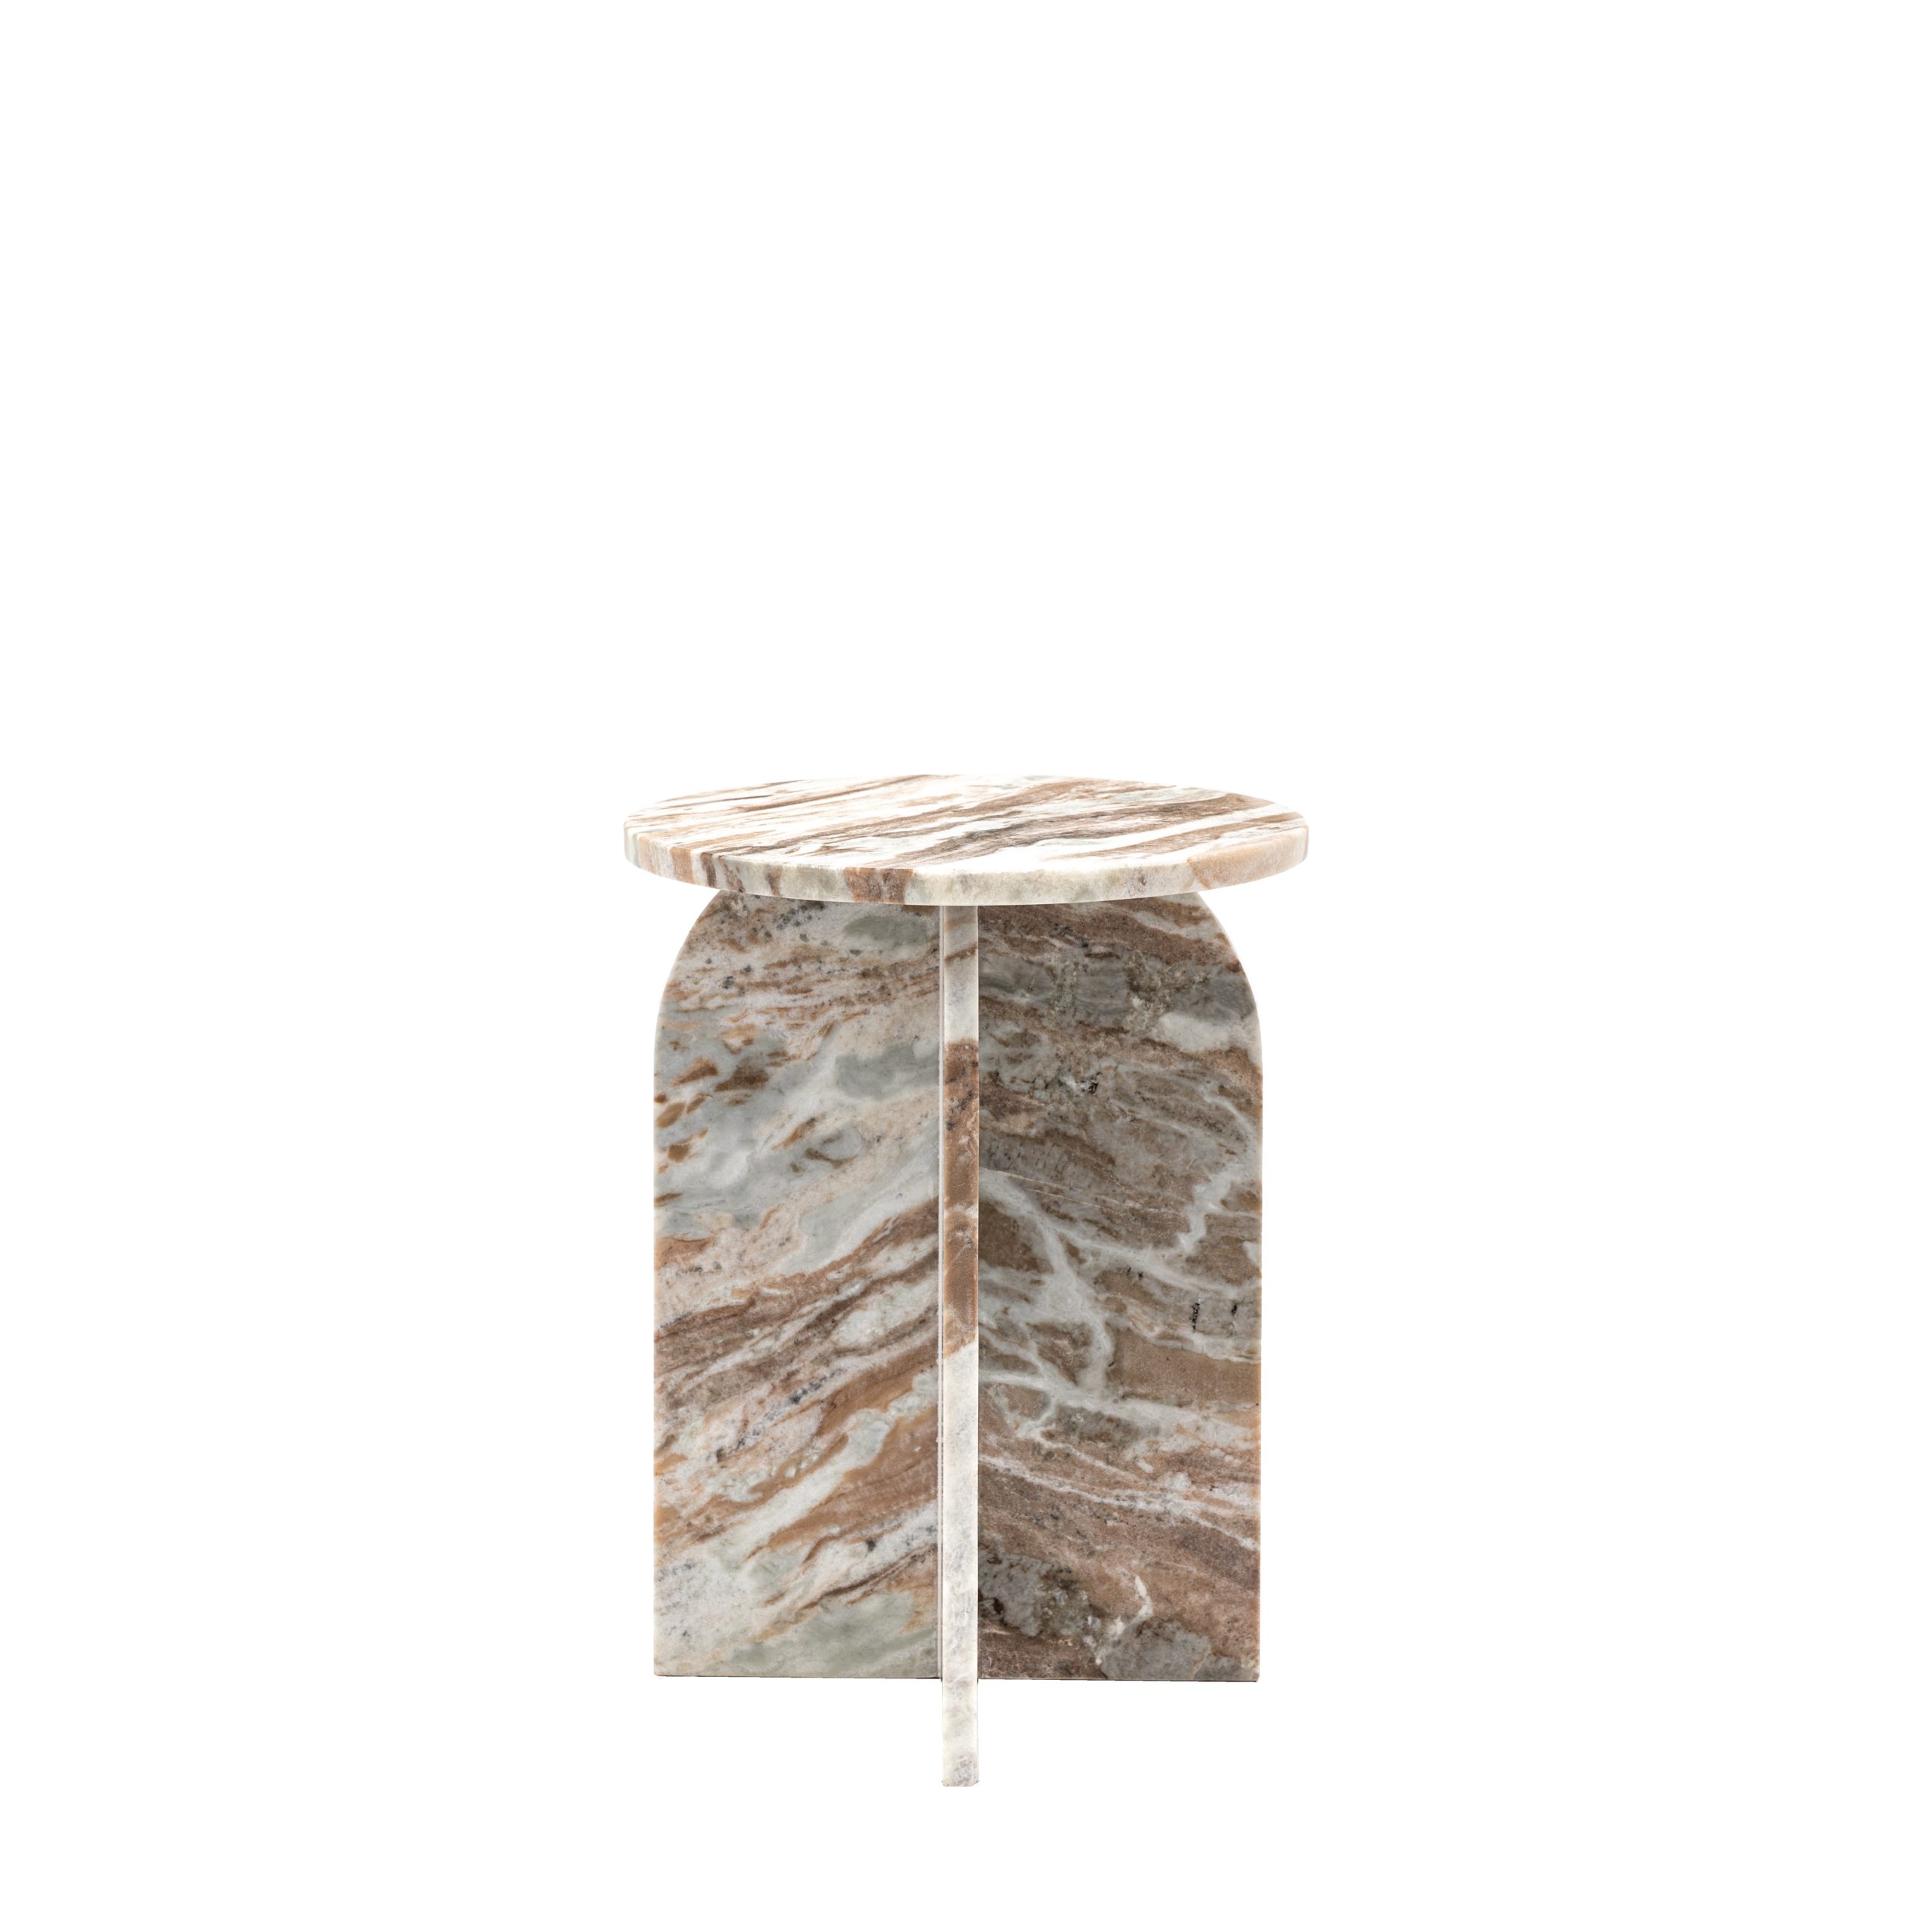 Gallery Direct Amalfi Side Table Natural